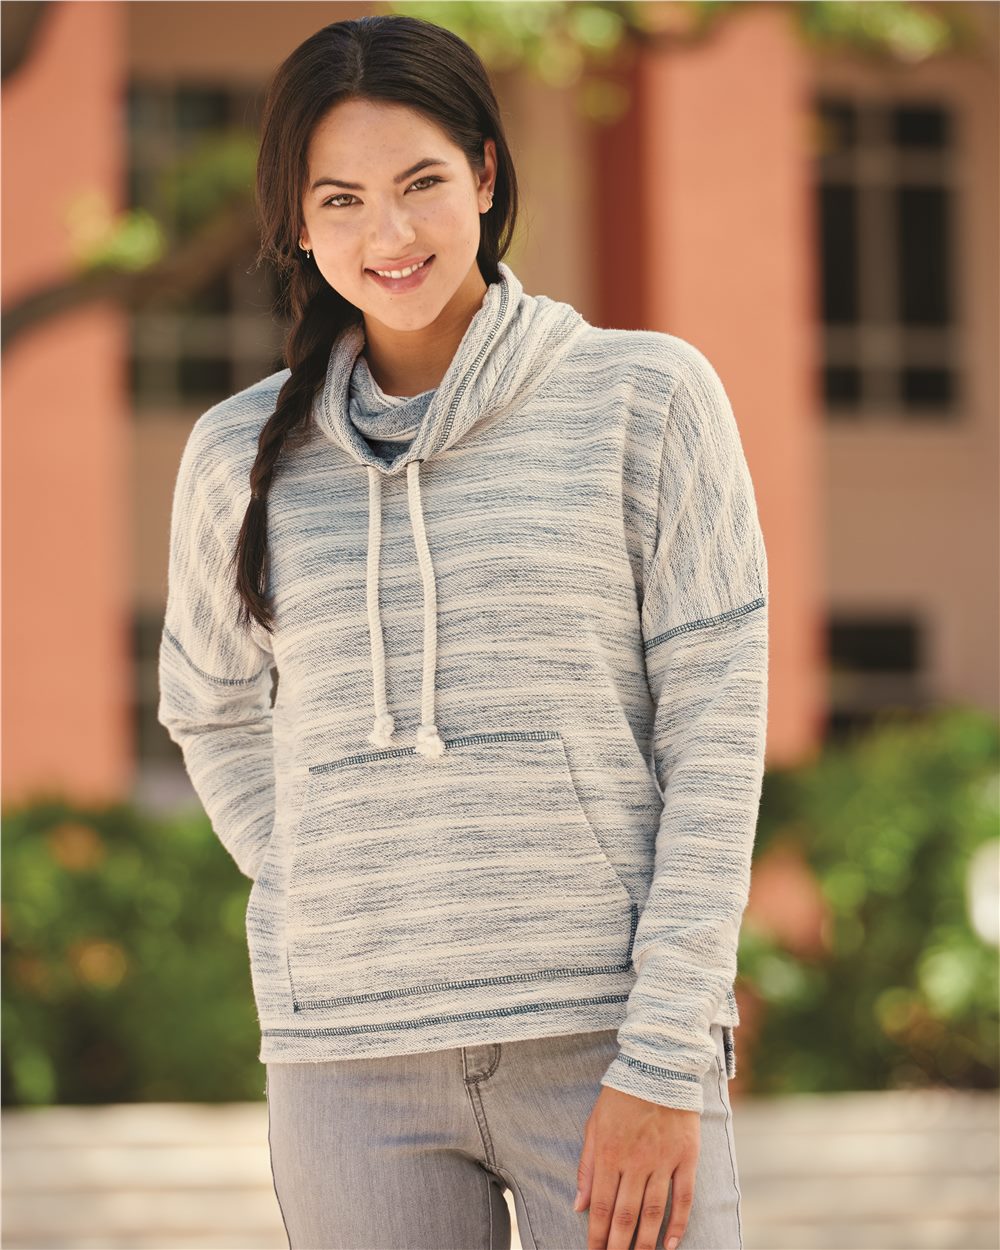 J. America 8693 - Baja Women's French Terry Cowlneck Pullover